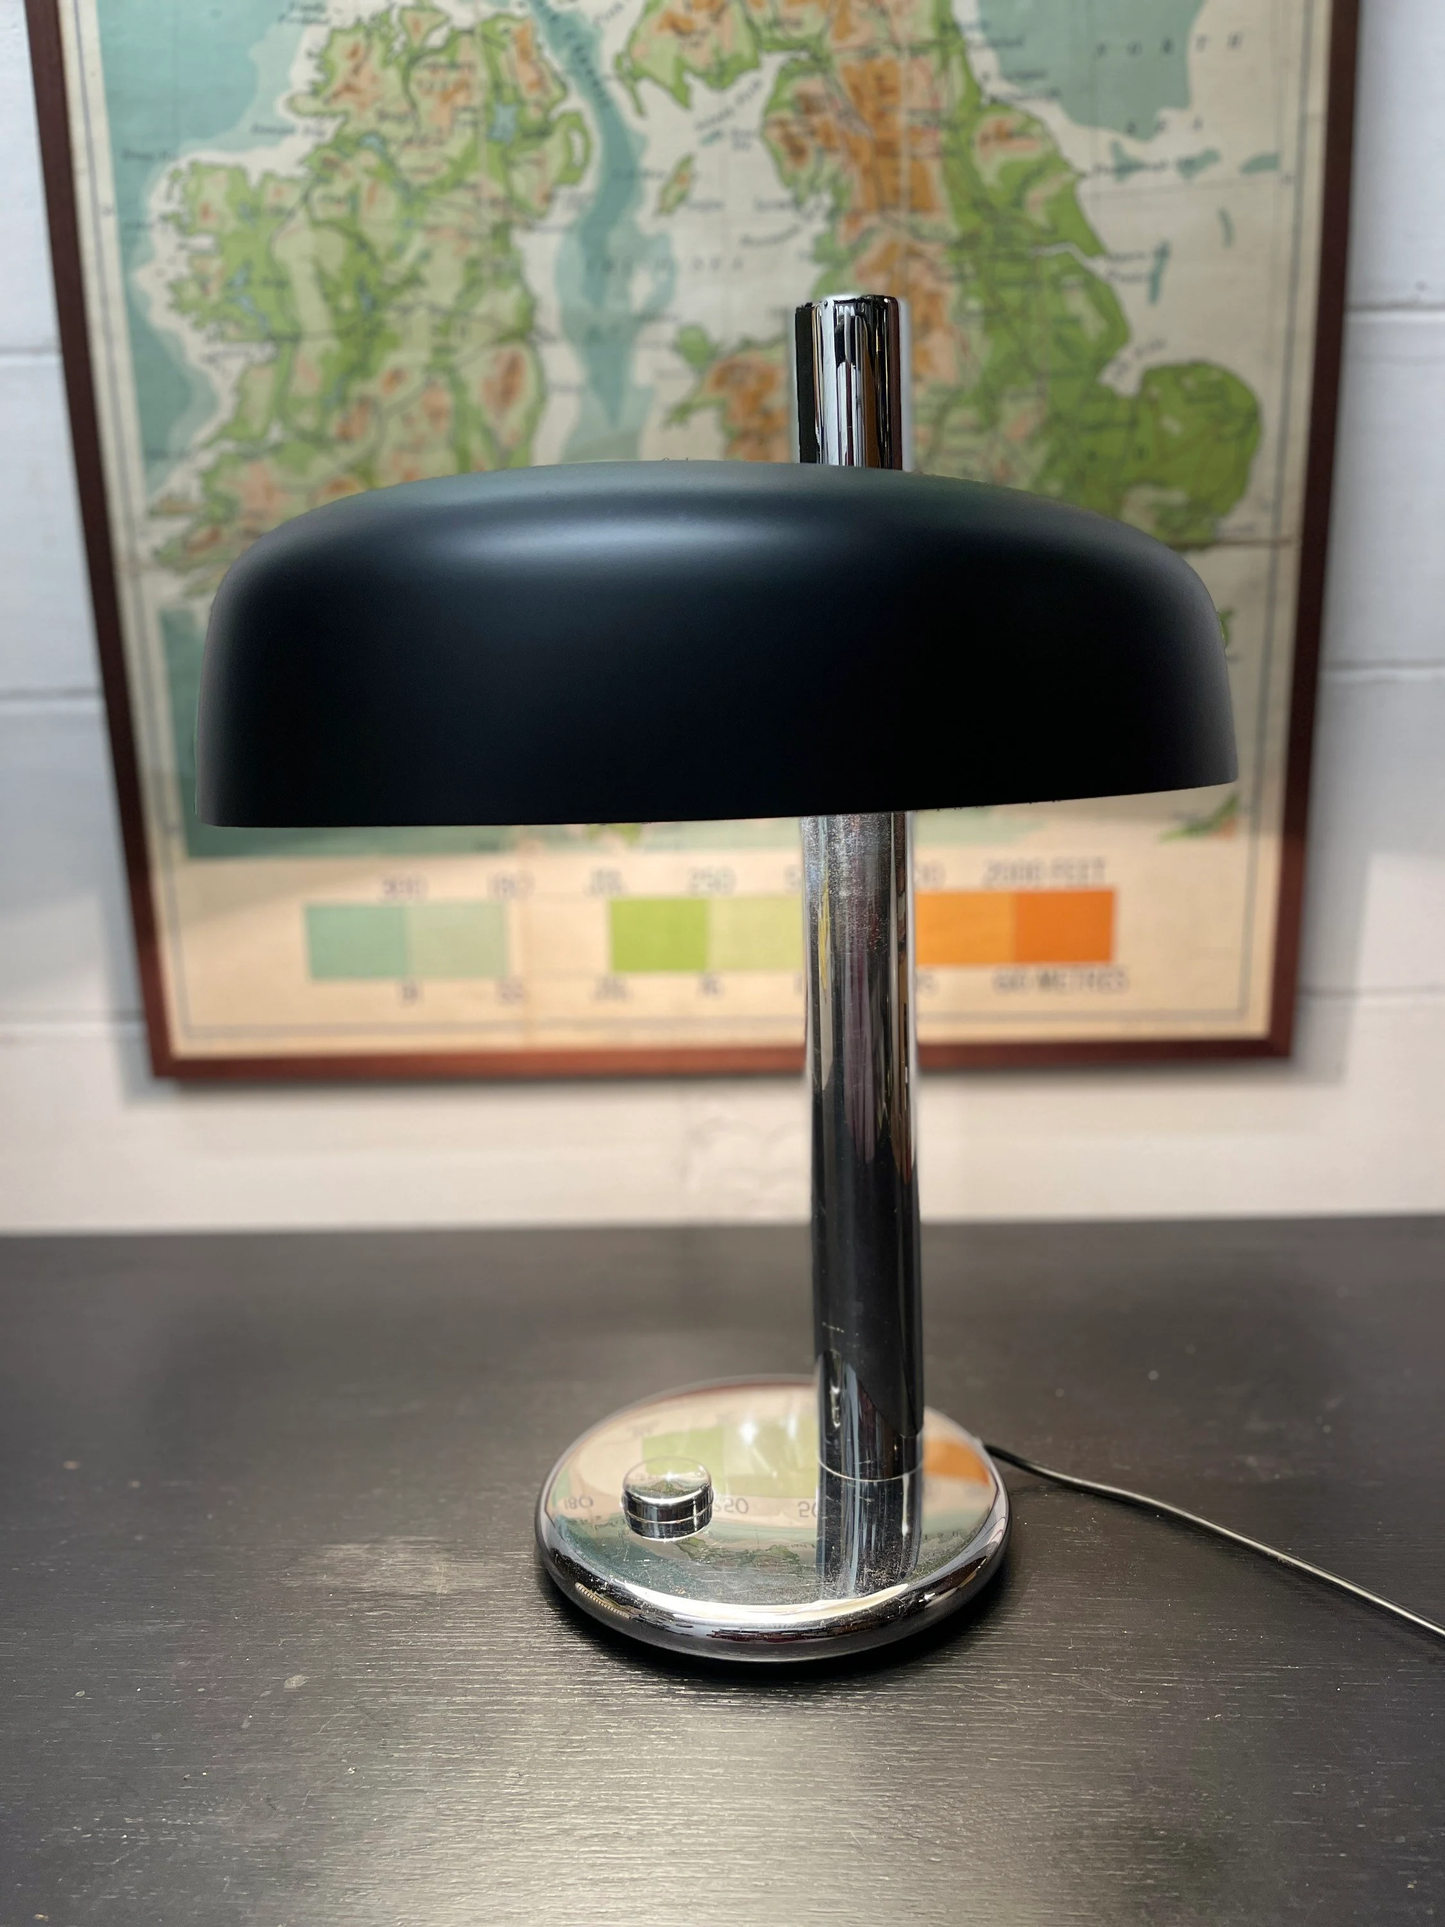 Large Table Lamp By Heinz F W Stahl For Hillebrand Lighting Circa 1969 Model 7603